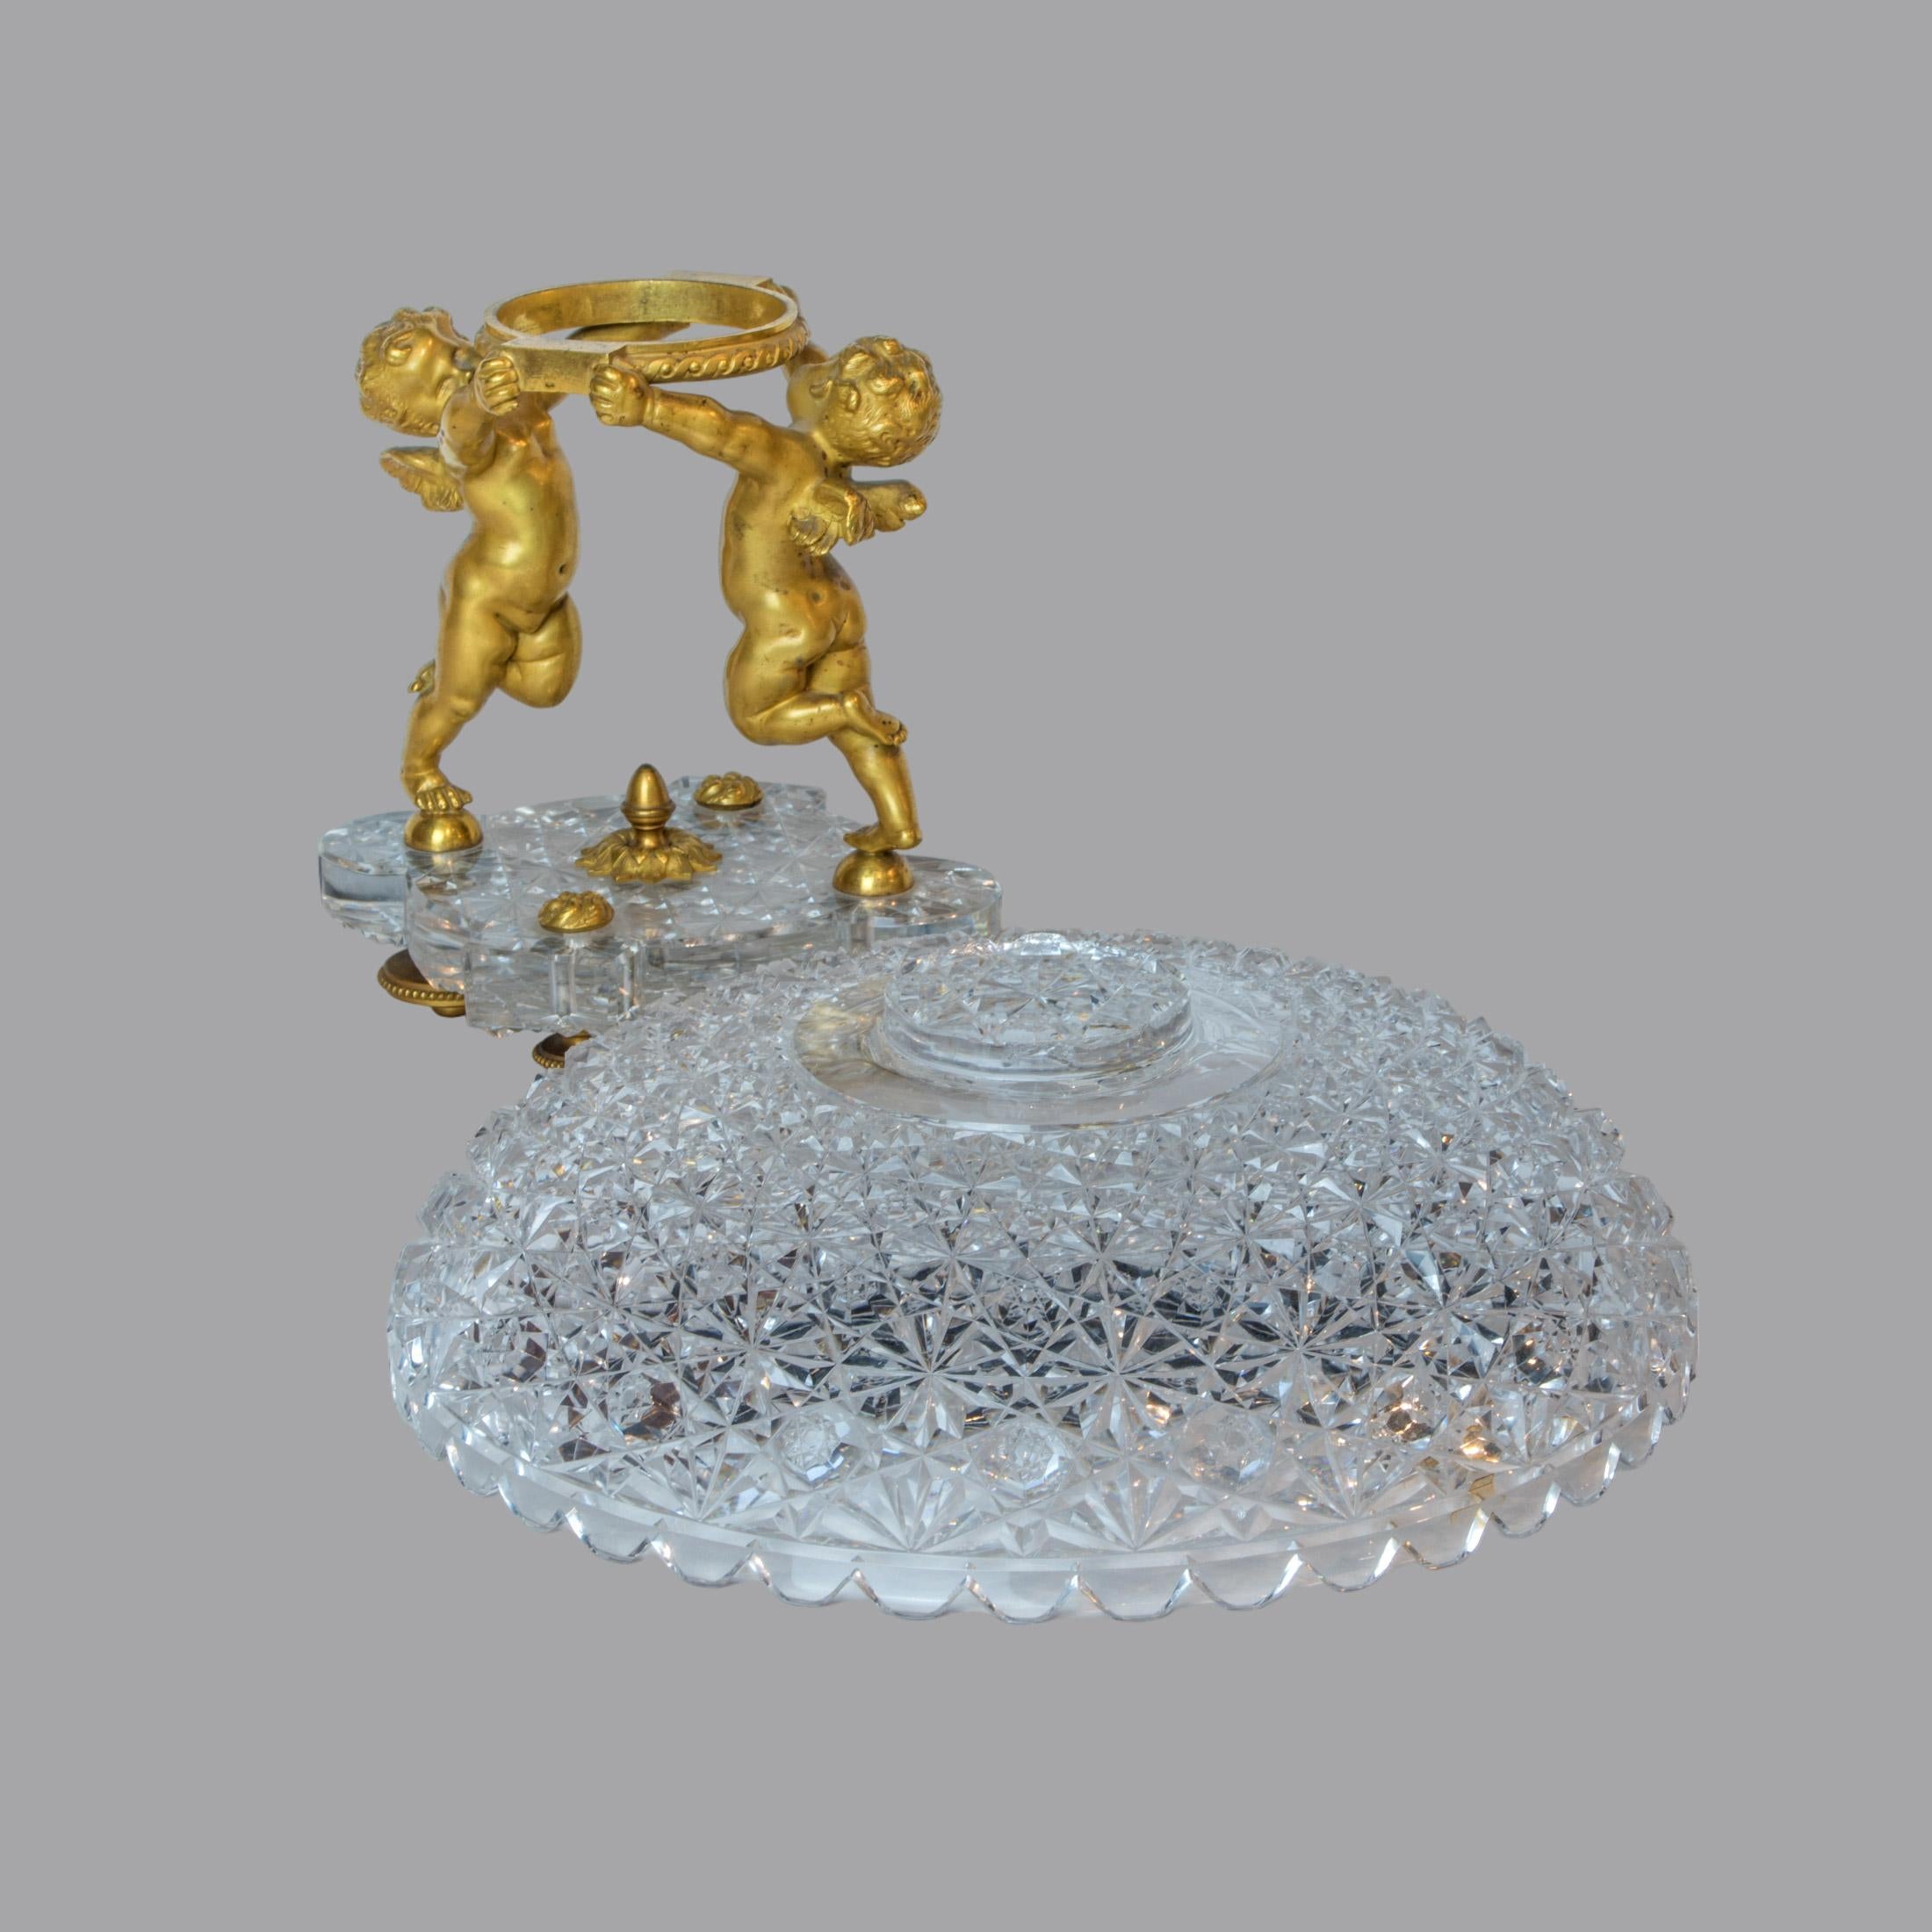 Highly  Important Baccarat 19th Century Cut Crystal and Ormolu Garniture For Sale 12